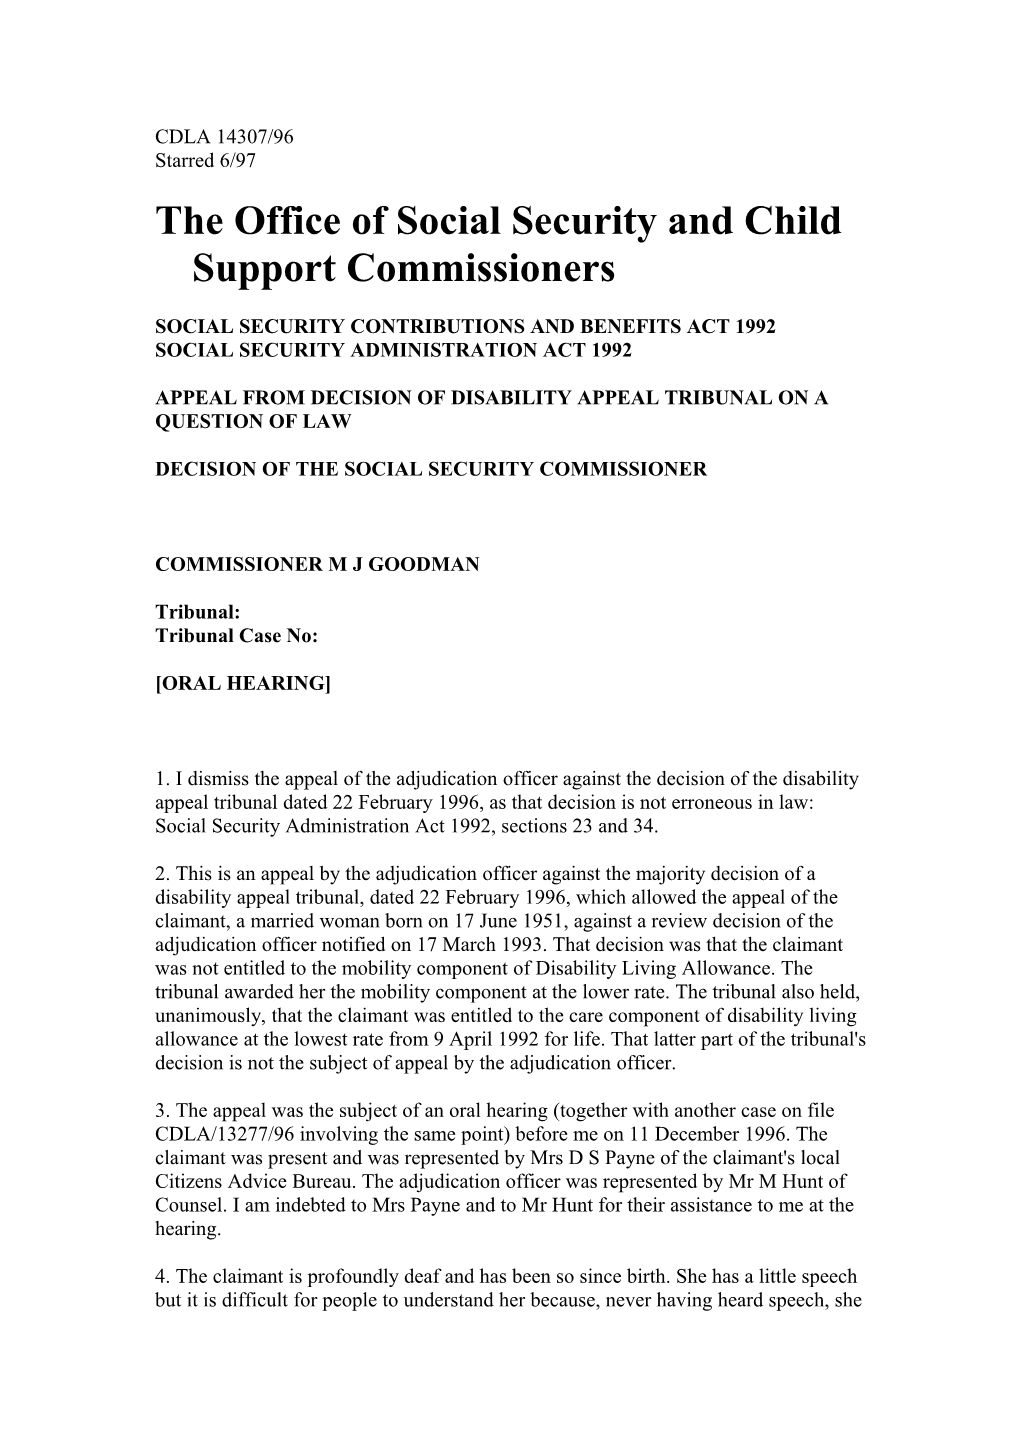 The Office of Social Security and Child Support Commissioners s1